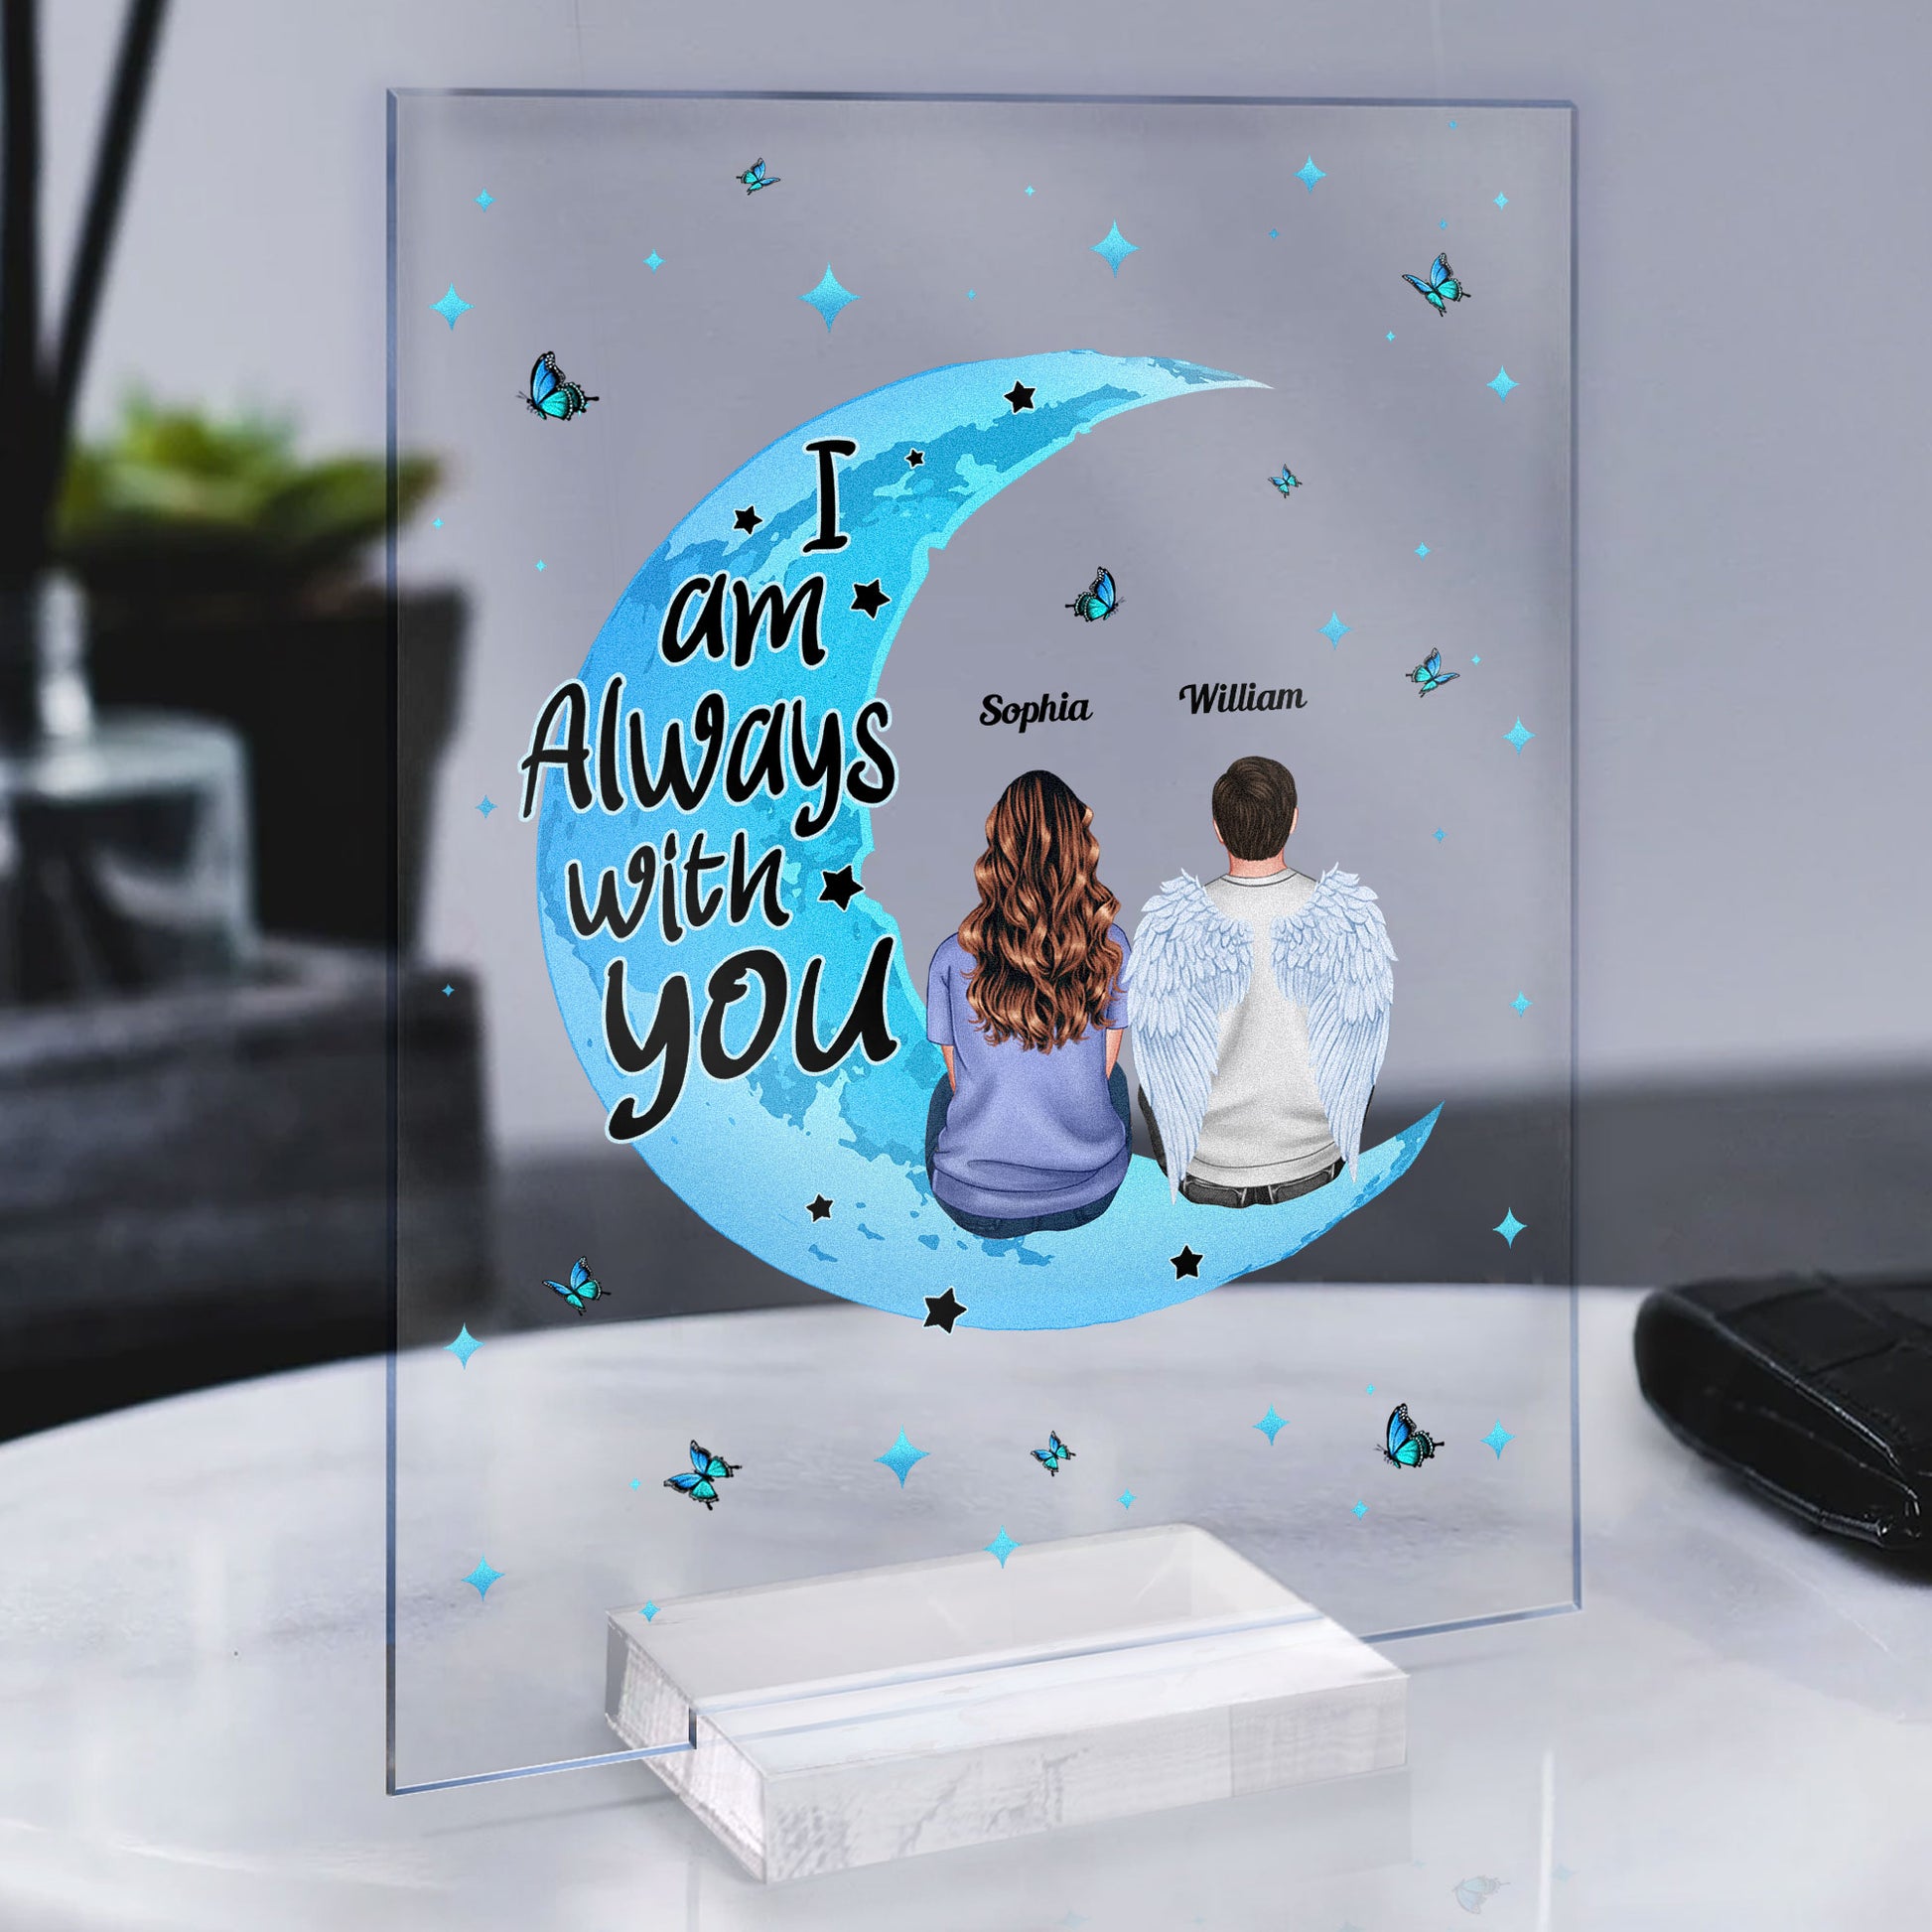 To Us You Are The World - Personalized Acrylic Plaque – Macorner